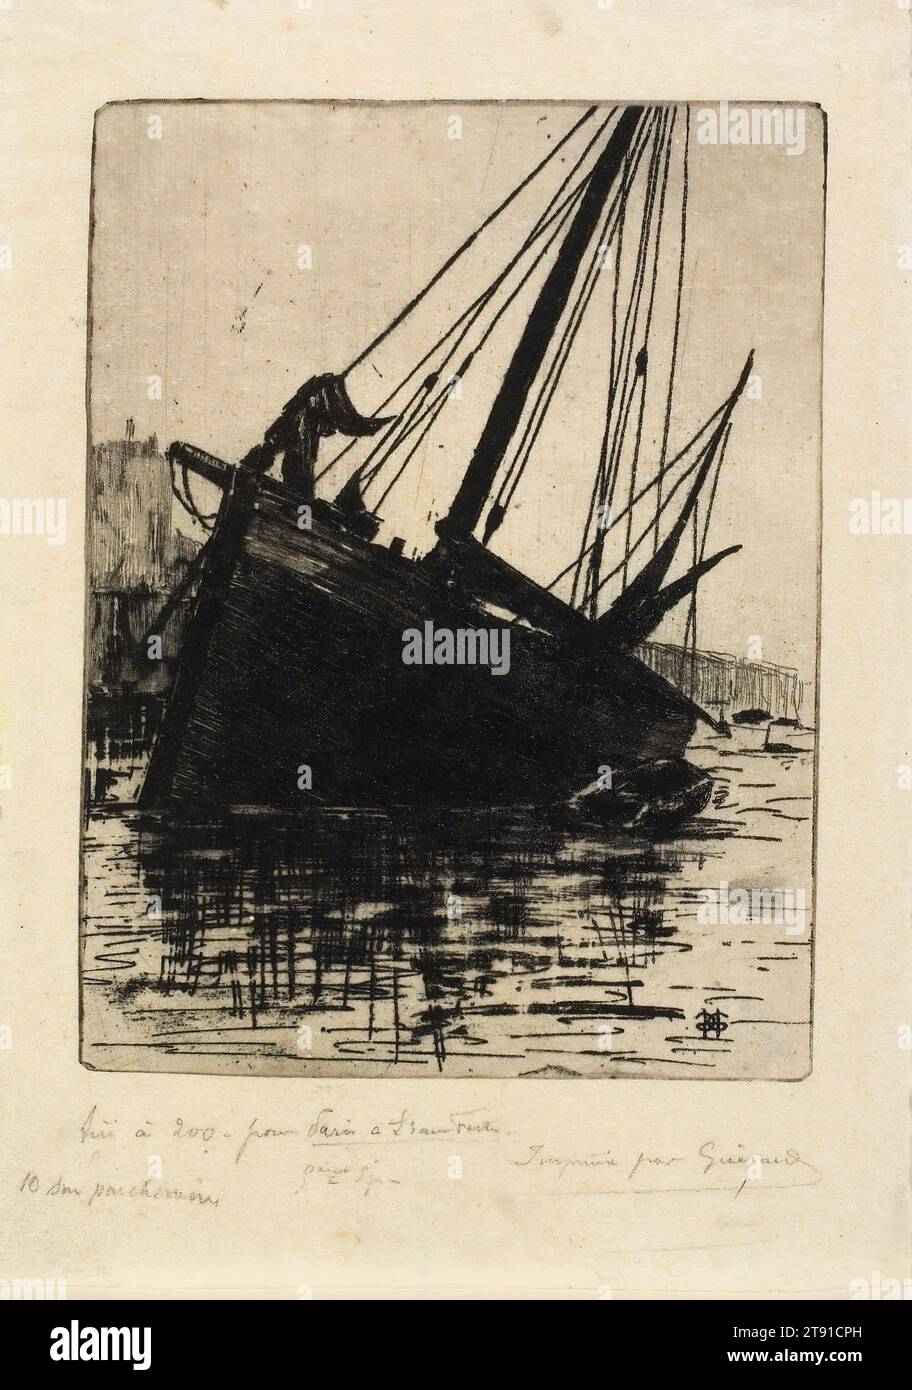 Stranded, c. 1888, Henri-Charles Guérard, French, Paris 1846–Paris 1897, 8 1/4 x 6 1/8 in. (20.96 x 15.56 cm) (plate)10 7/8 x 7 3/4 in. (27.62 x 19.69 cm) (sheet), Etching, France, 19th century, Though unknown to most Americans, Henri-Charles Guérard was a member of the Parisian avant-garde in the 1870s and 1880s and a close associate of the painter Edouard Manet. Guérard was one of the most prolific French printmakers of the nineteenth century. In addition to hundreds of book illustrations and reproductive prints, he created nearly 500 original works, most of which remained unpublished Stock Photo